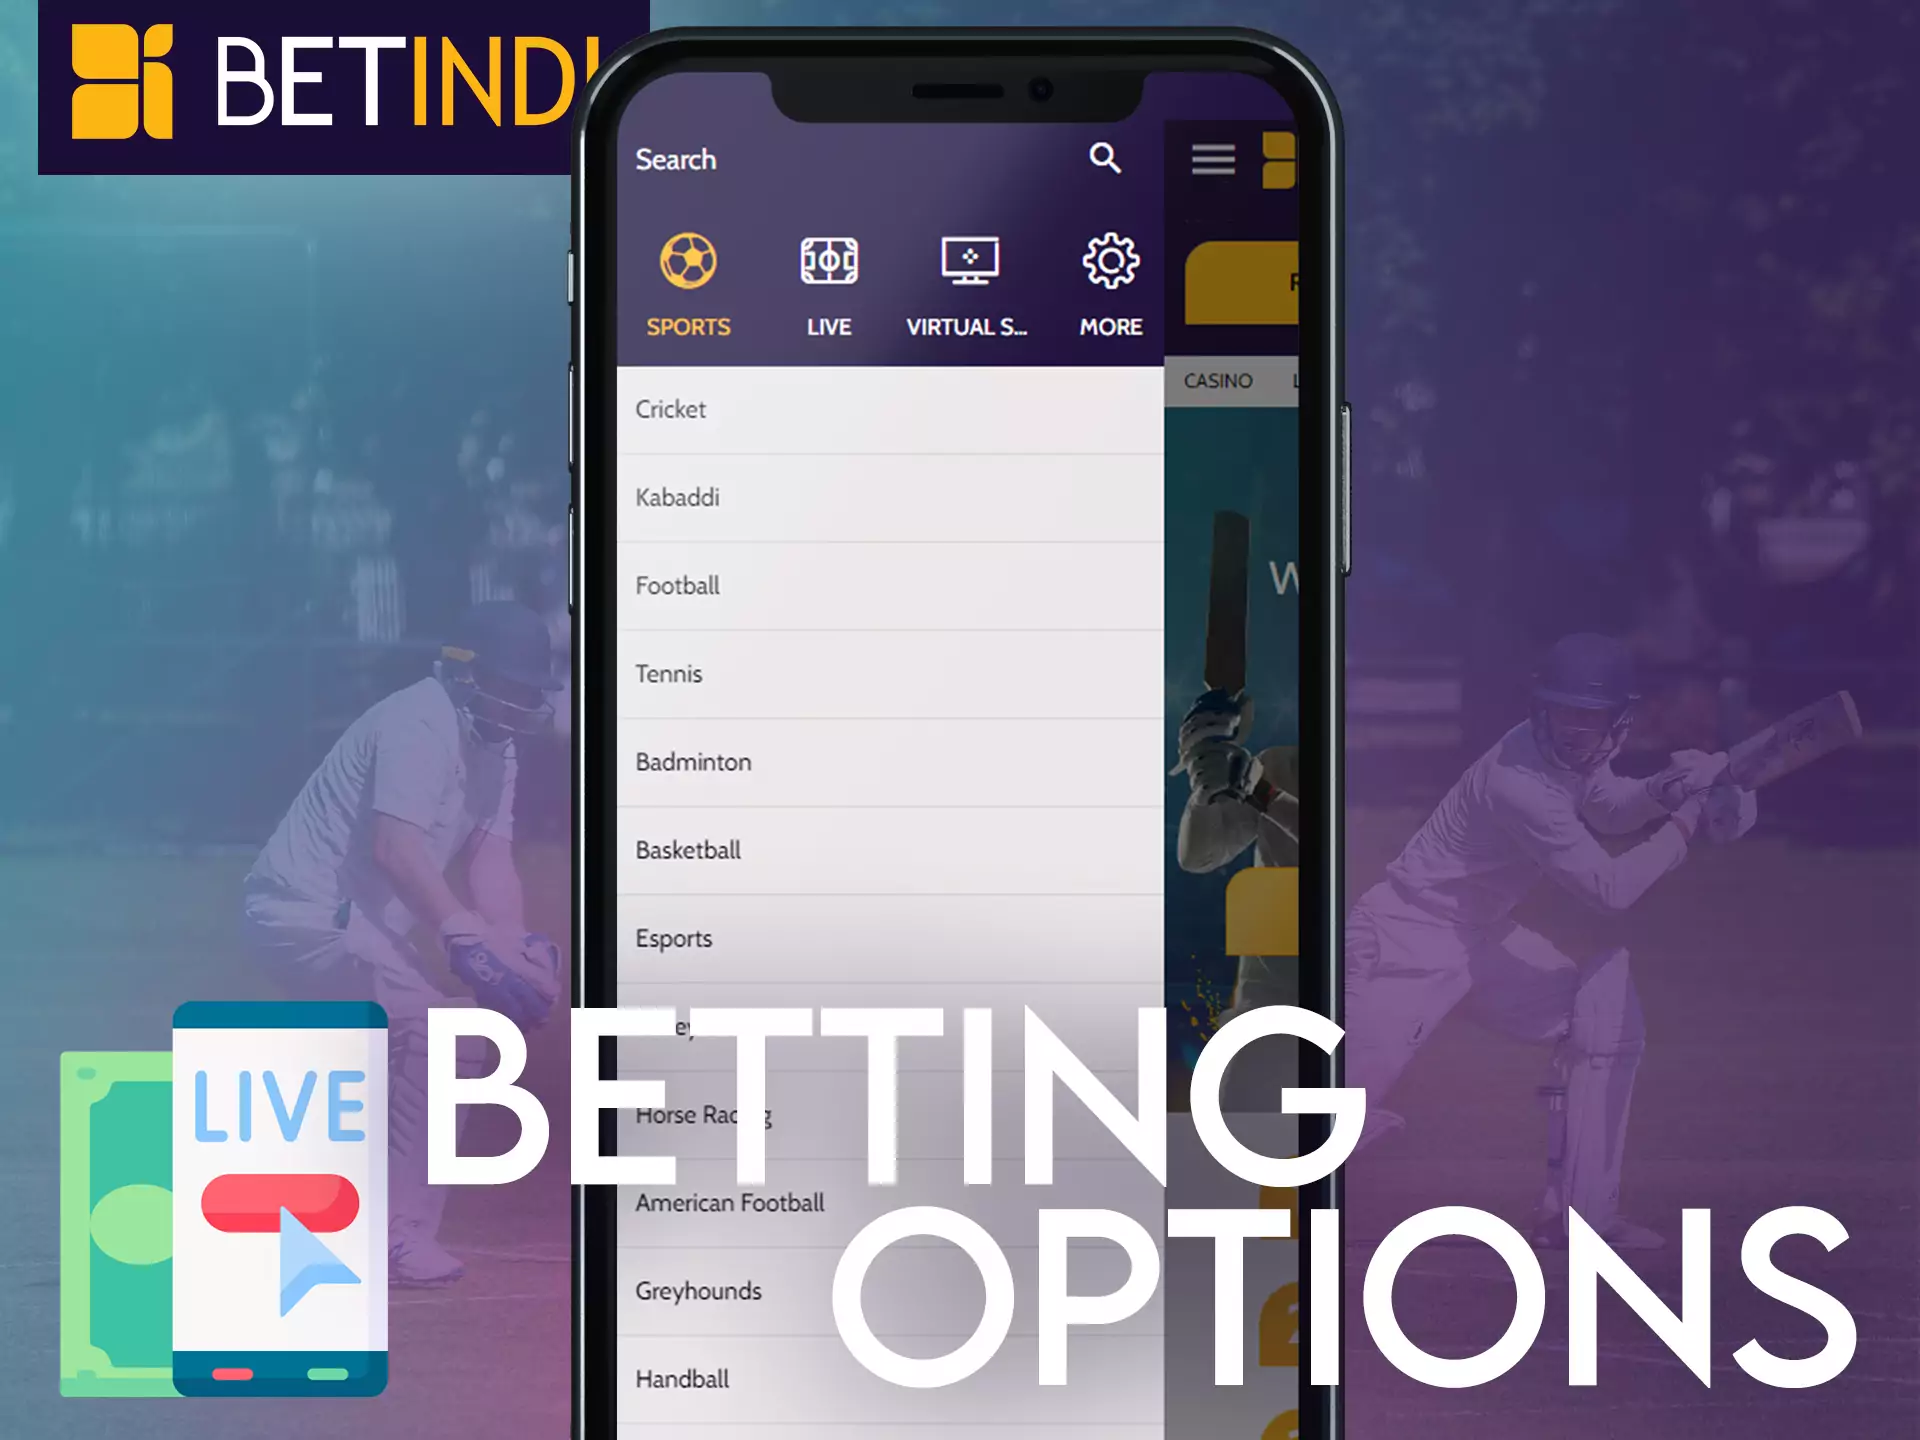 Betindi gives players many different betting options.